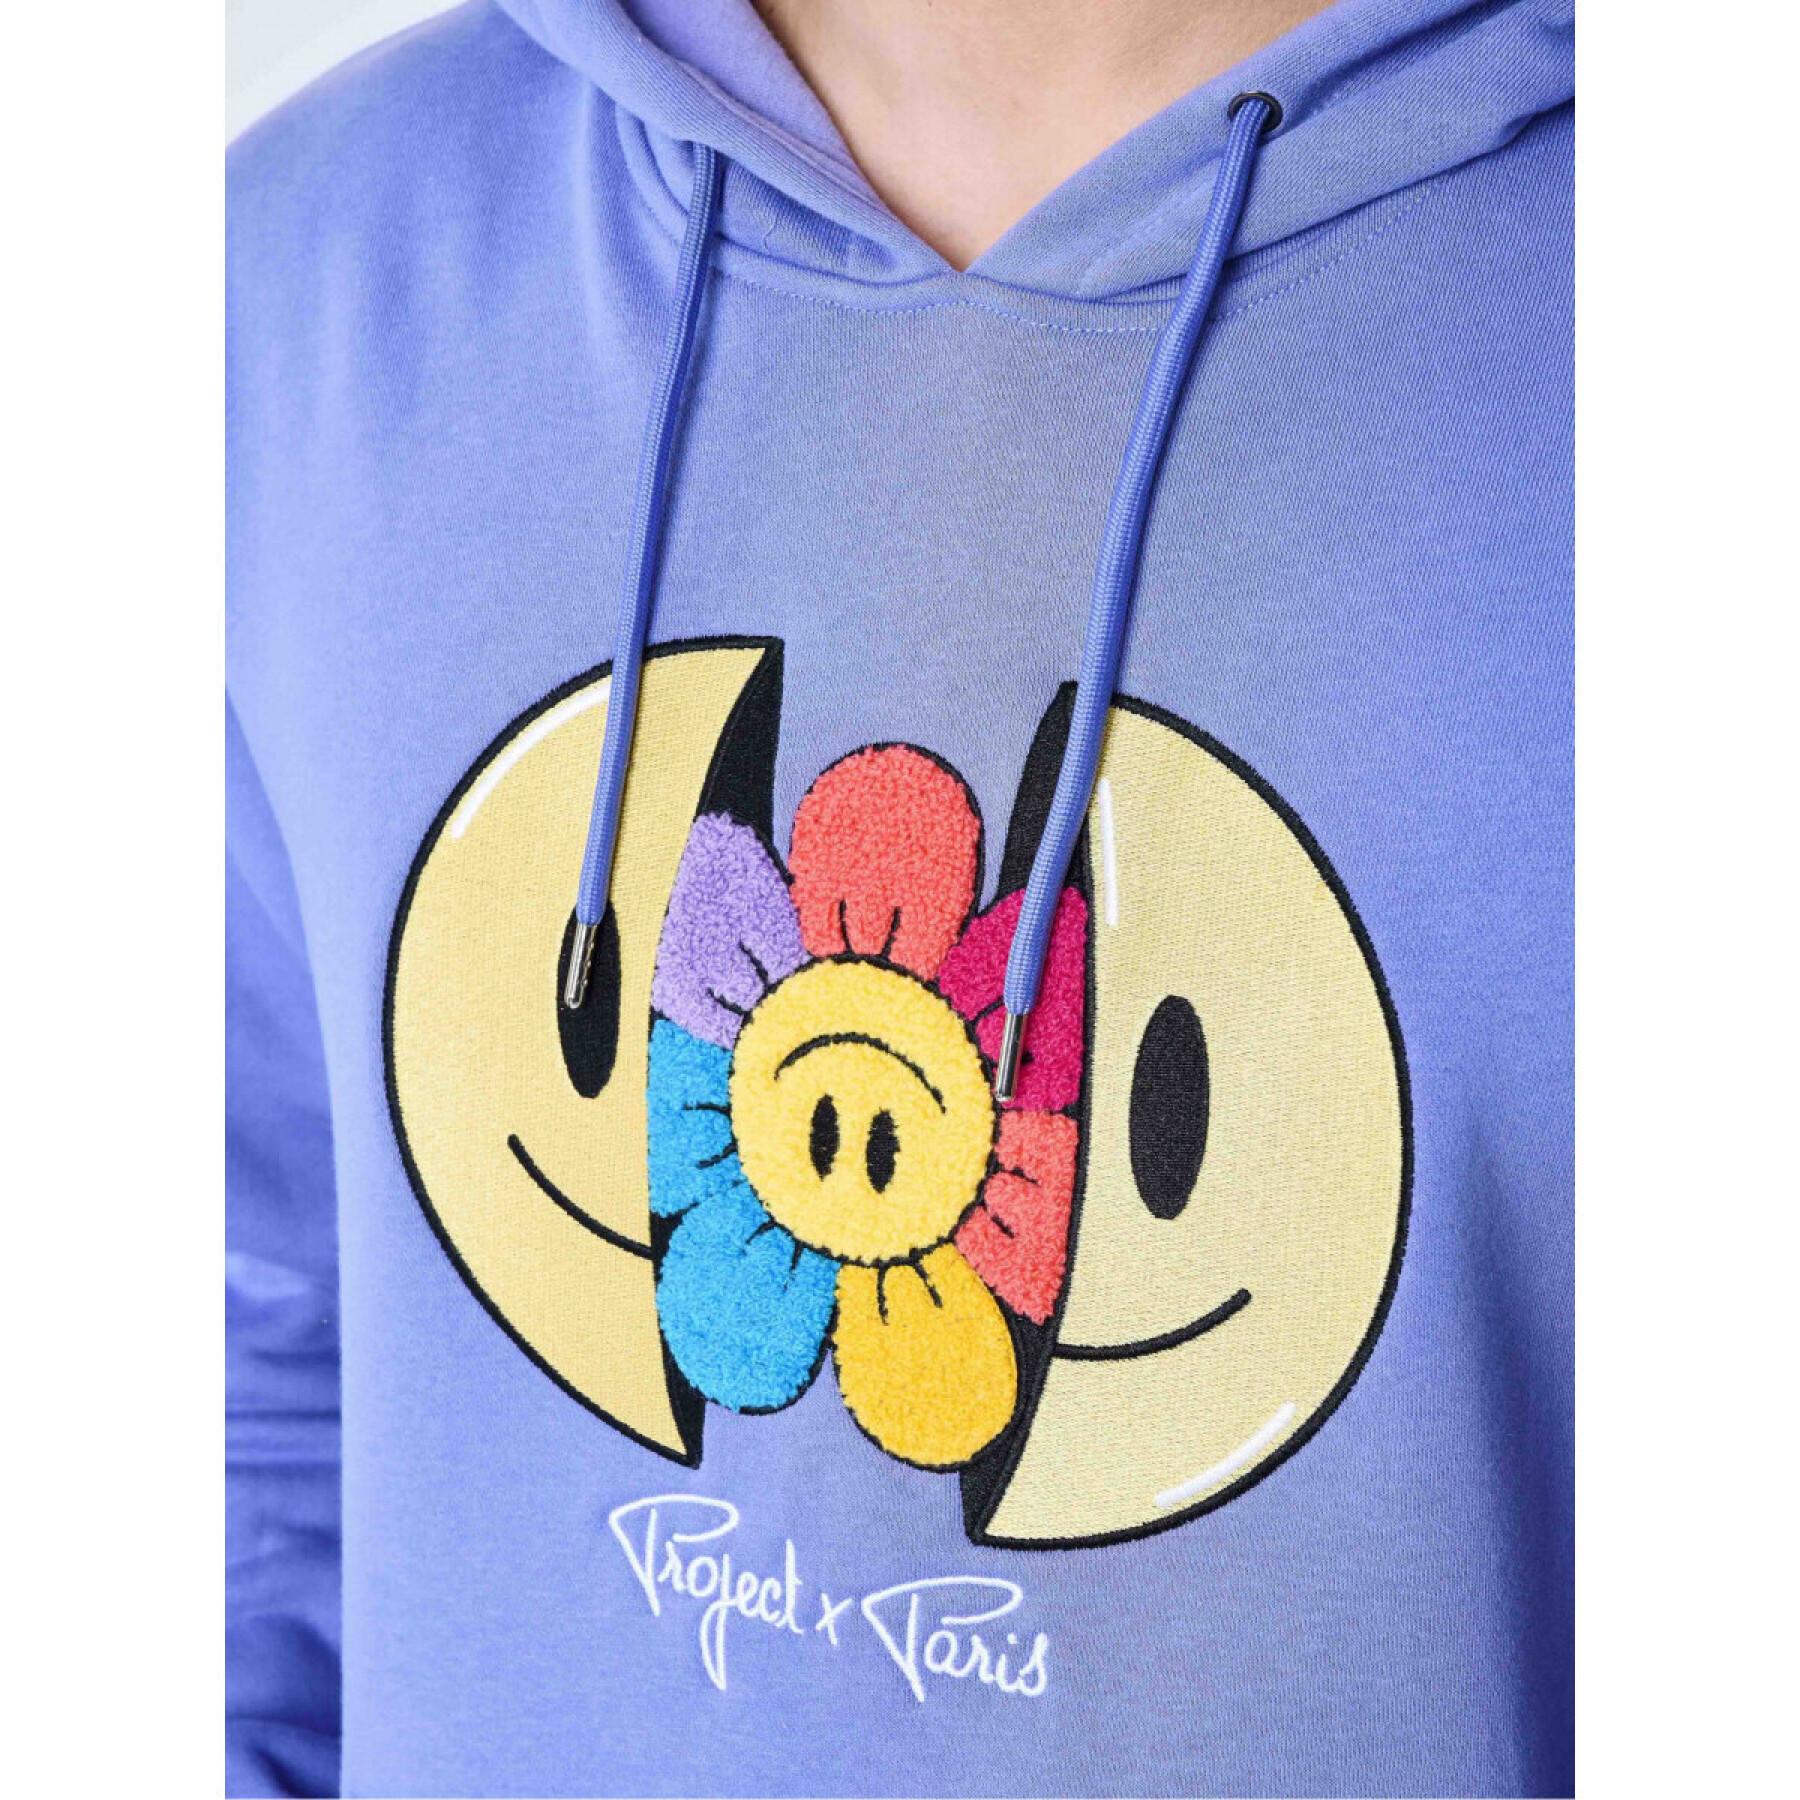 Smiley face embroidery hoodie Project X Paris